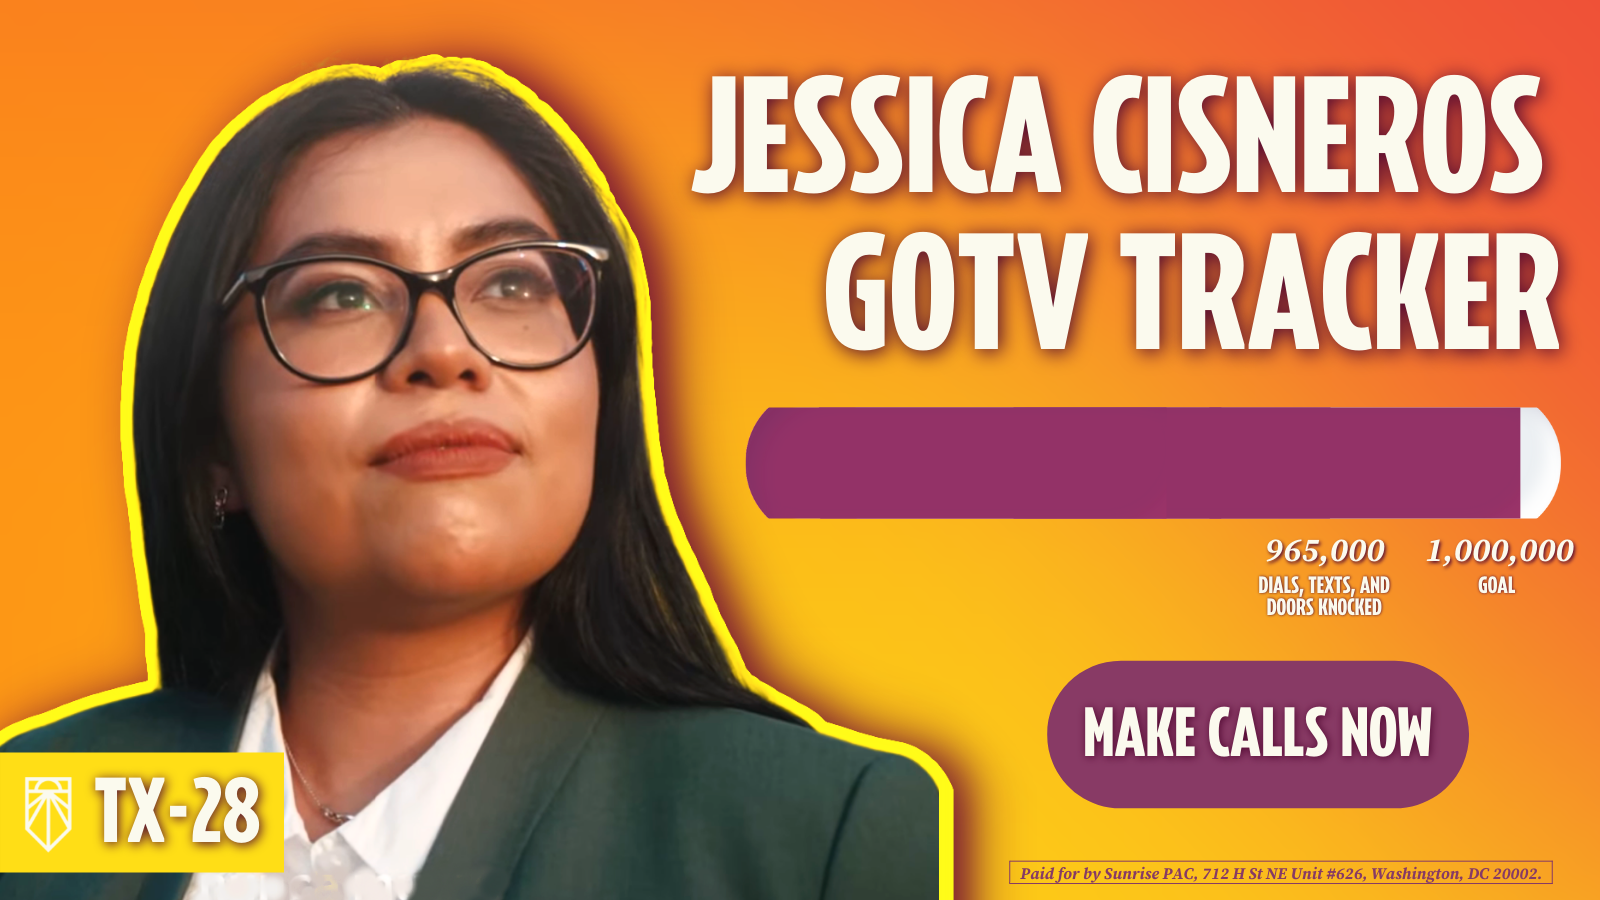 Jessica Cisneros GOTV Tracker - 965,000 attempted voter contacts, 1,000,000 goal - Make Calls. Paid for by Sunrise PAC, 712 H St NE Unit #626, Washington, DC 20002.